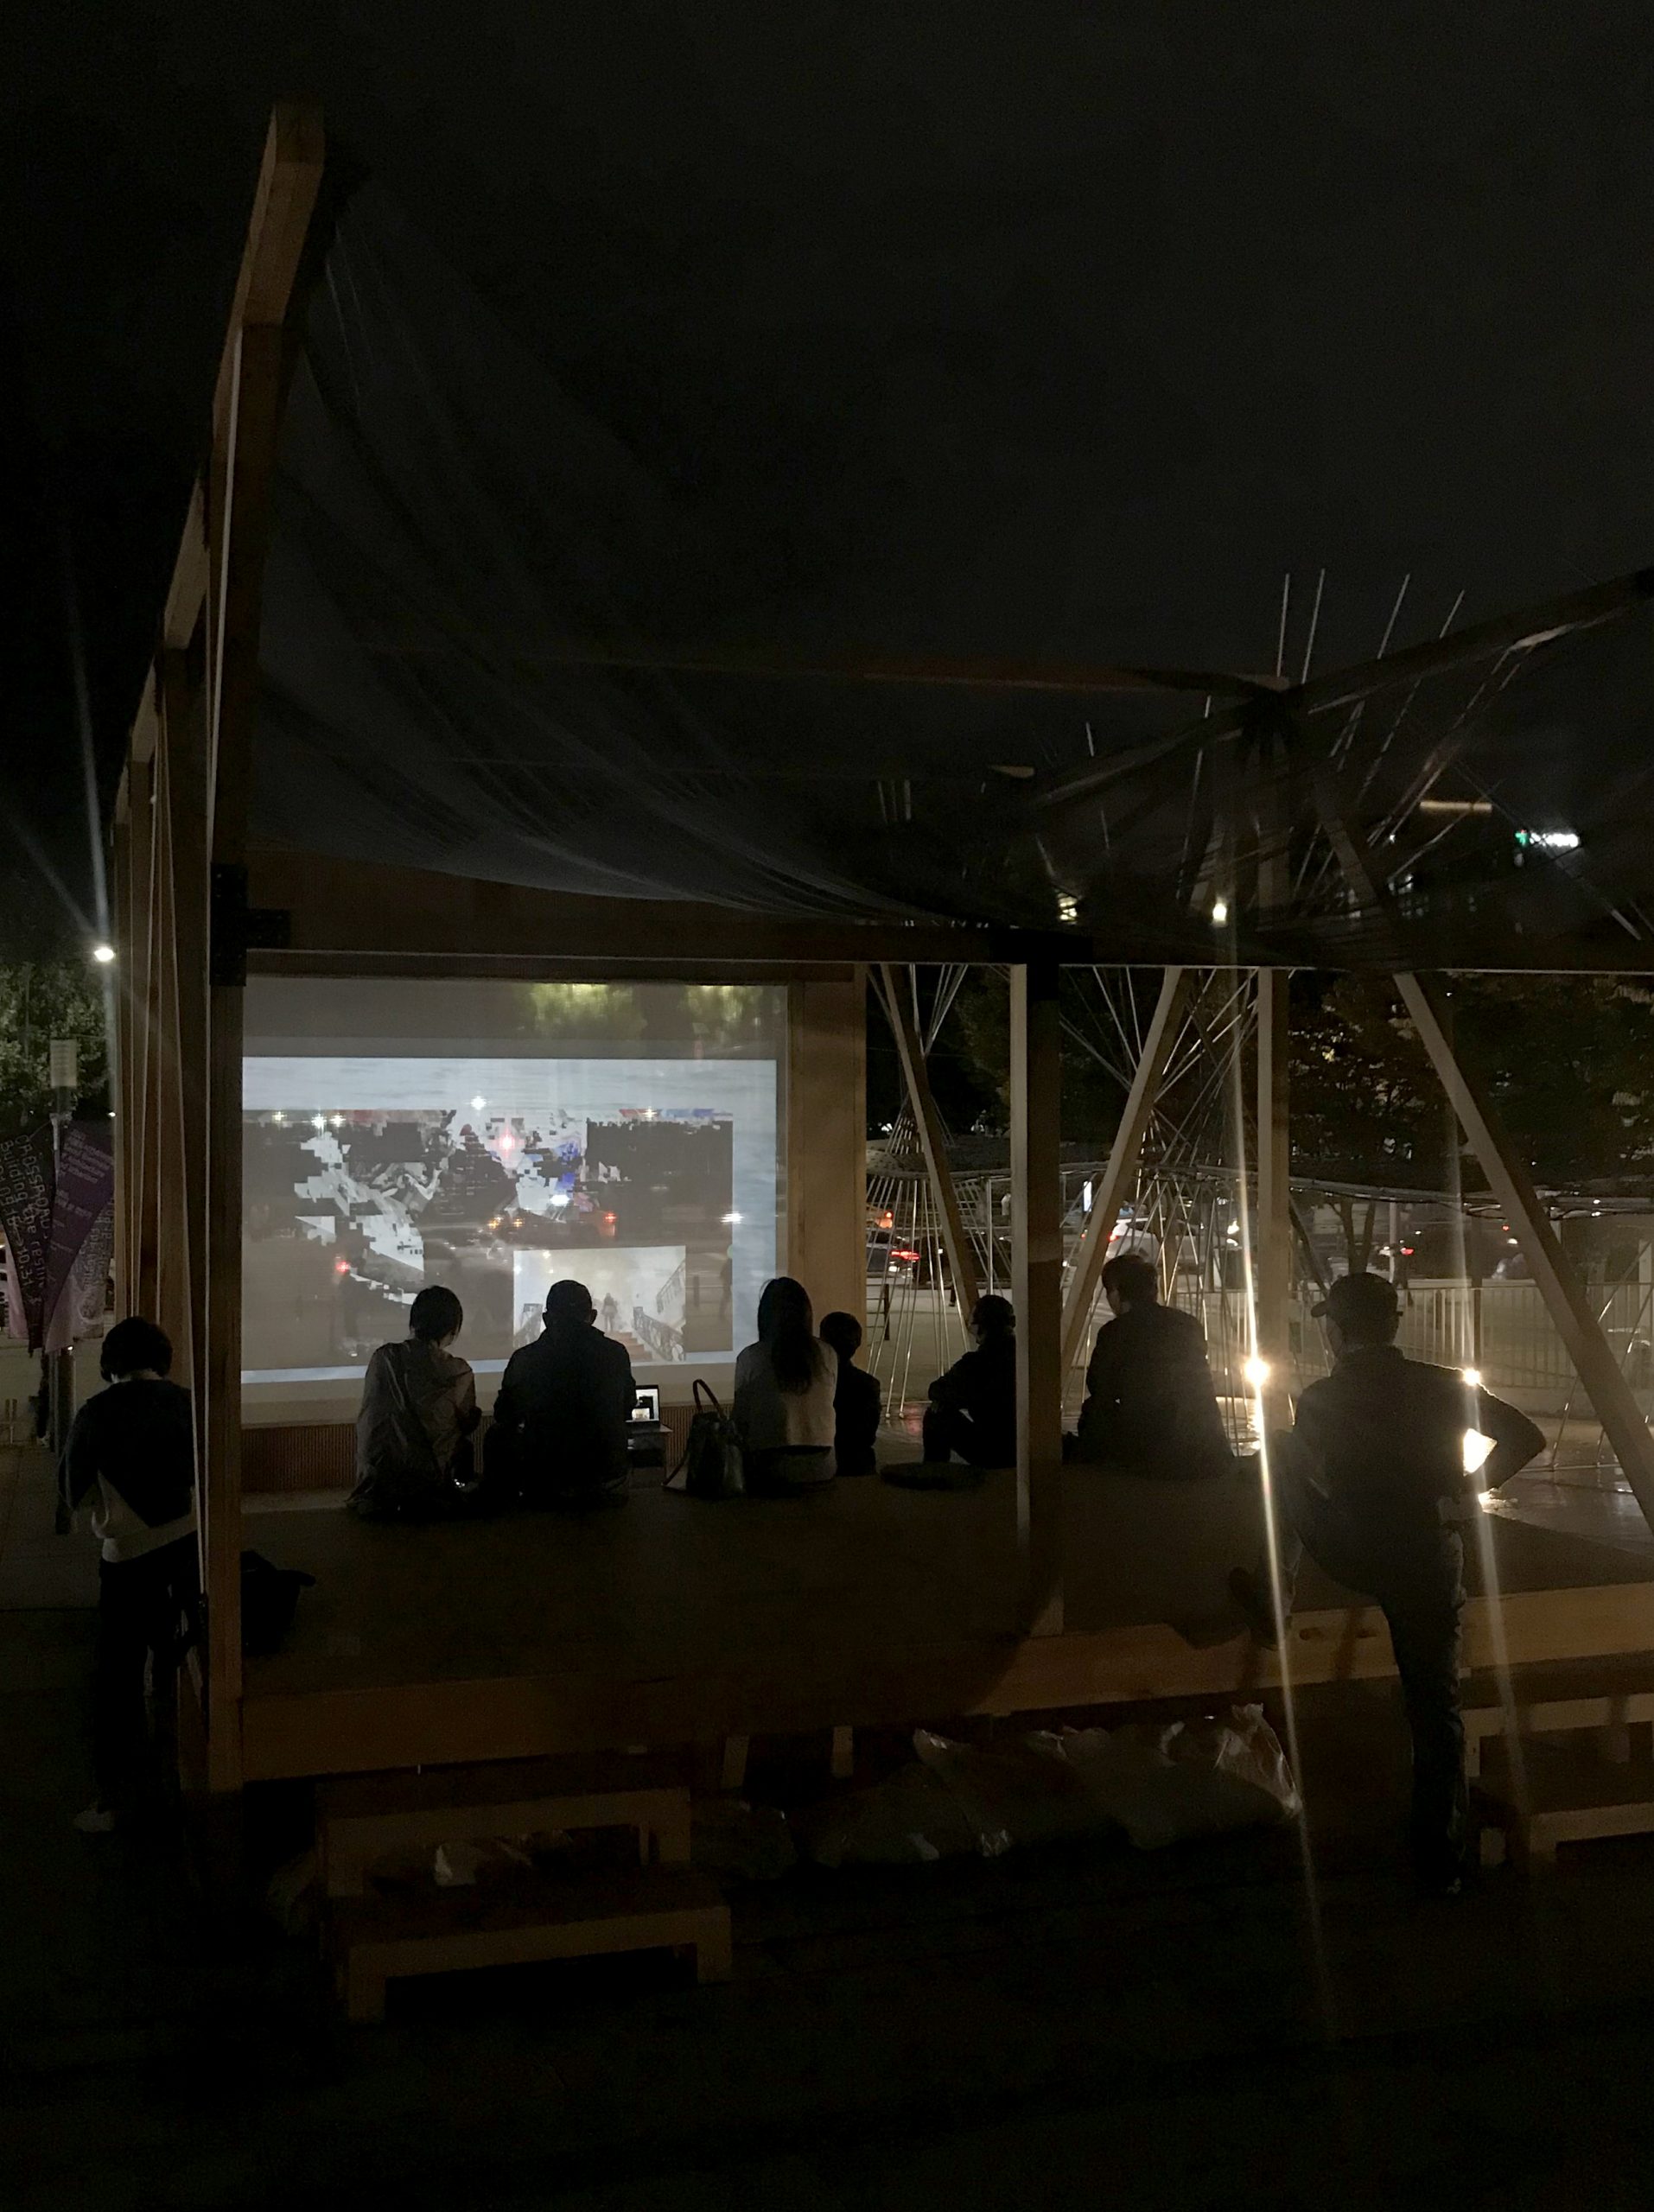 The offline screening view at the Kathouse, 2021